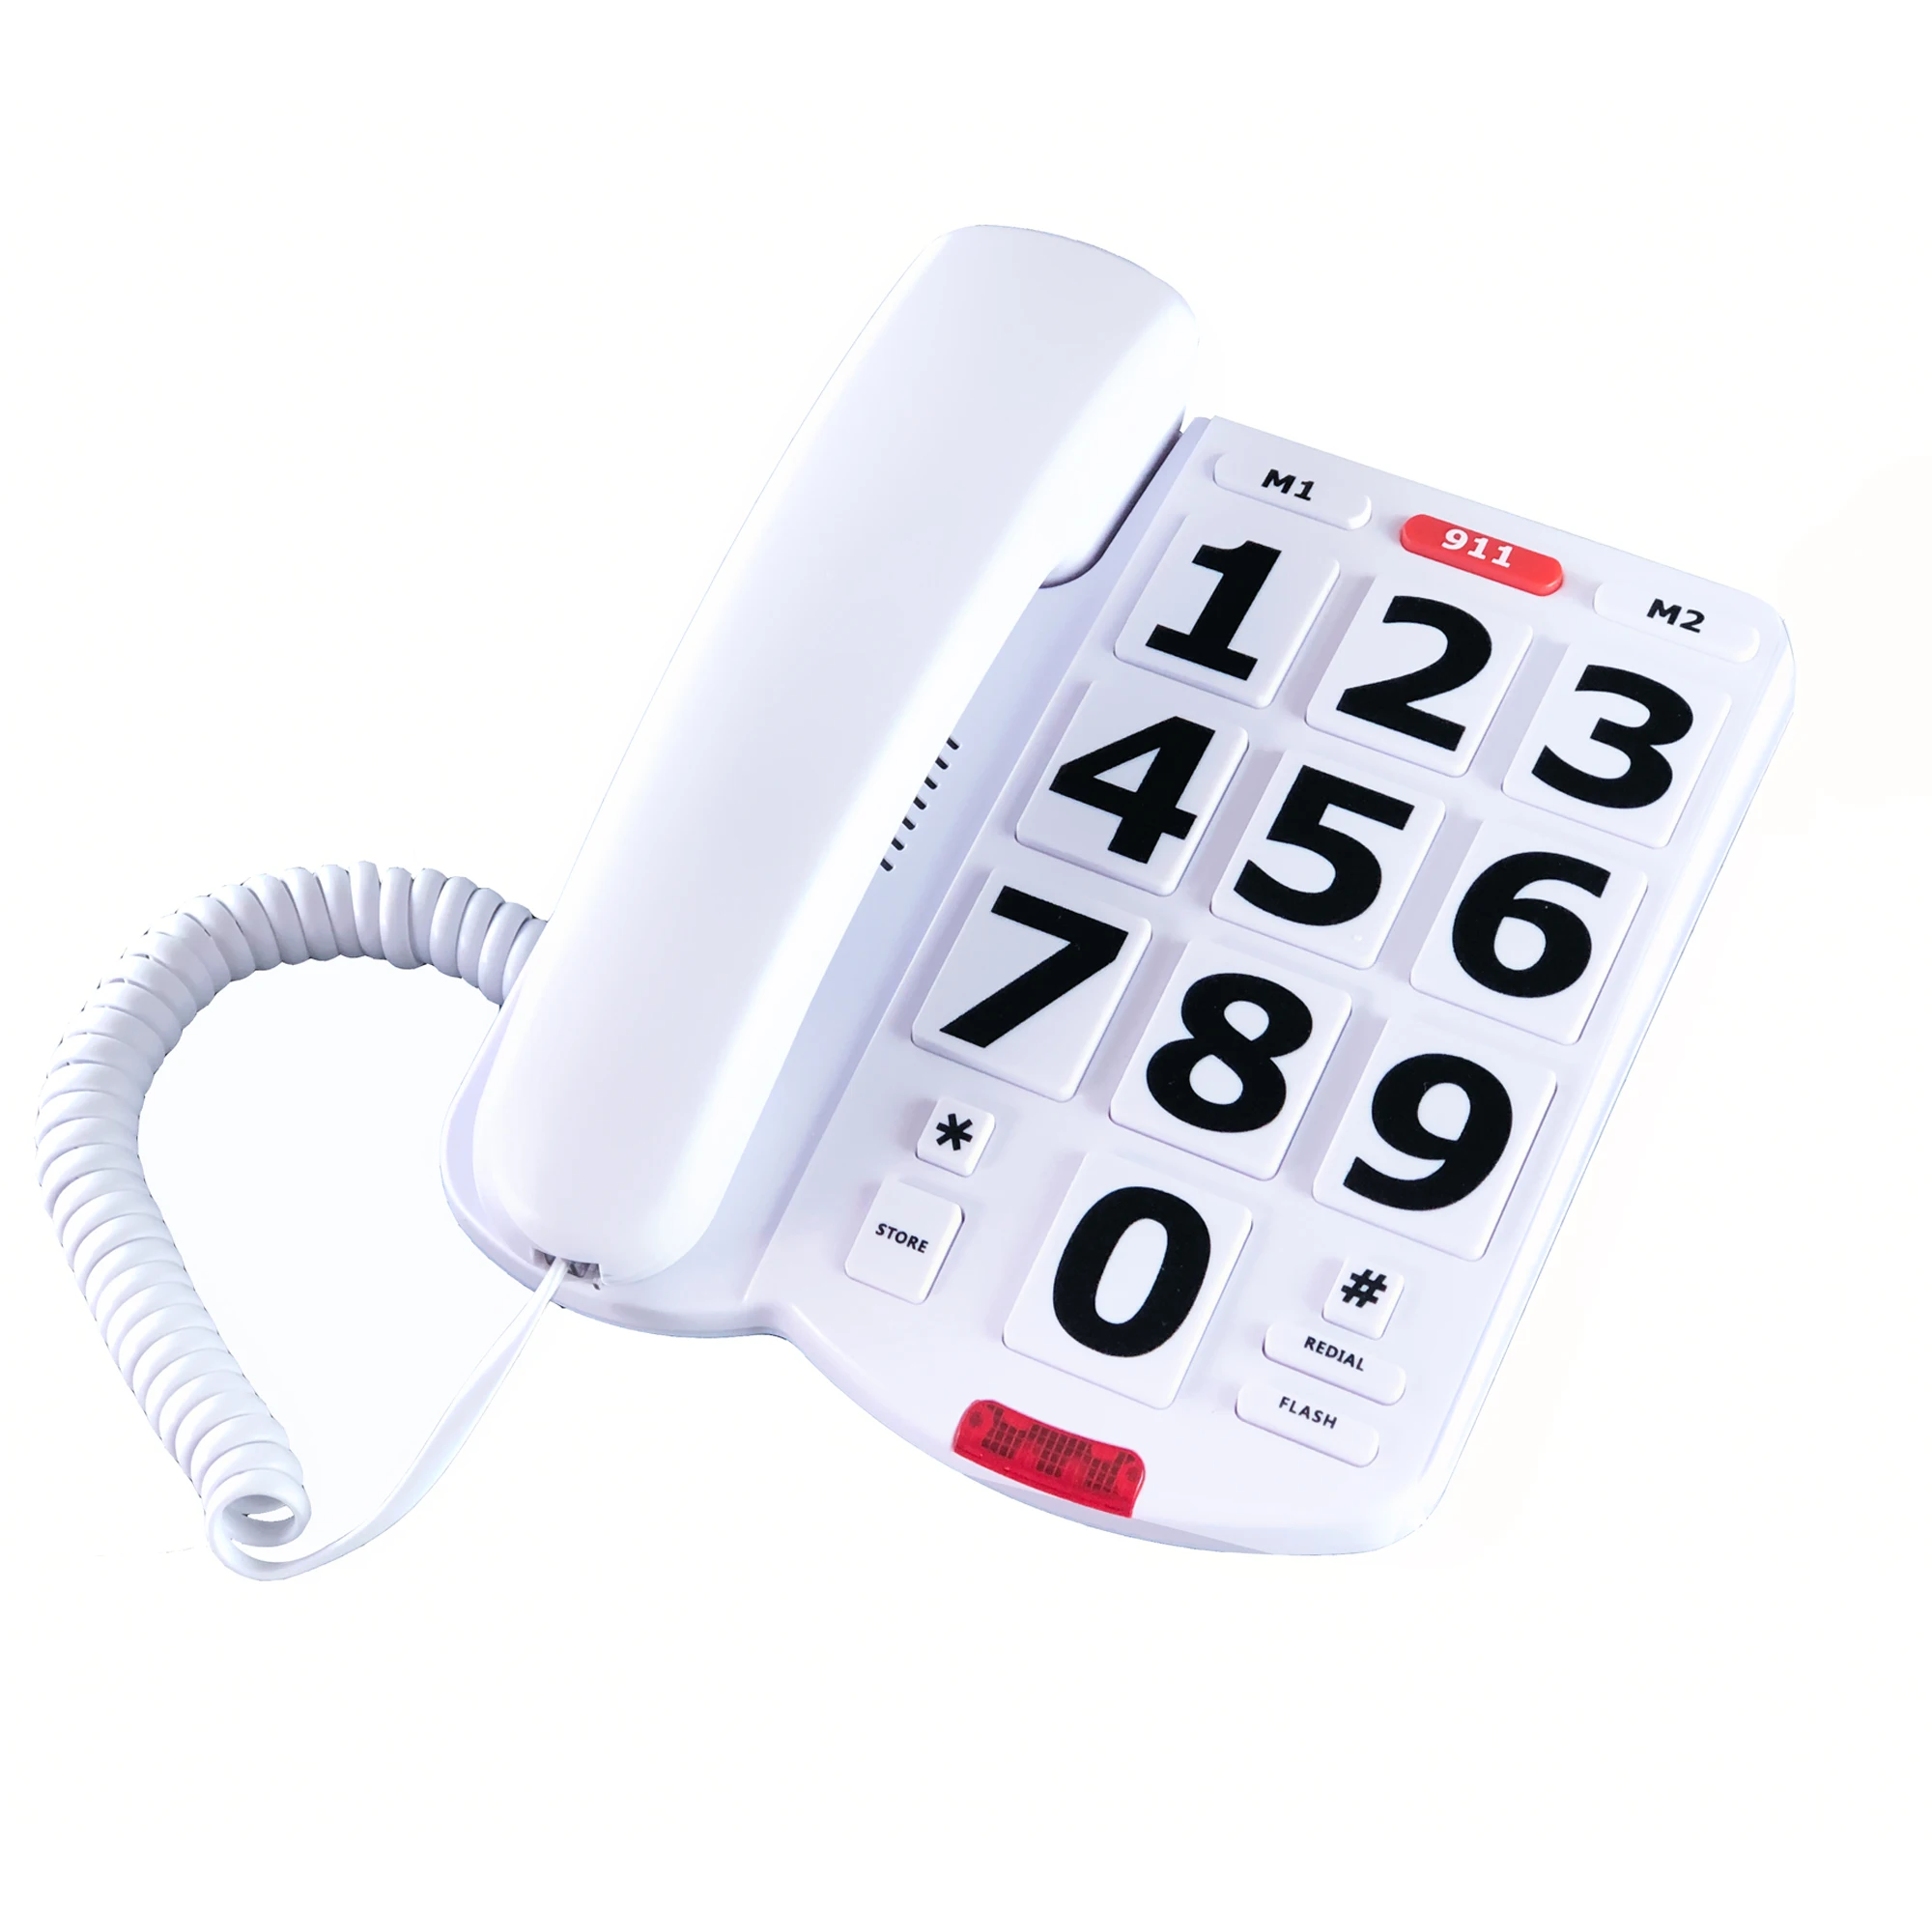 

Big Button Telephone for Seniors, Corded Single Line Easy to Read Desk Landline Phone for Visually & Hearing Impaired Old People